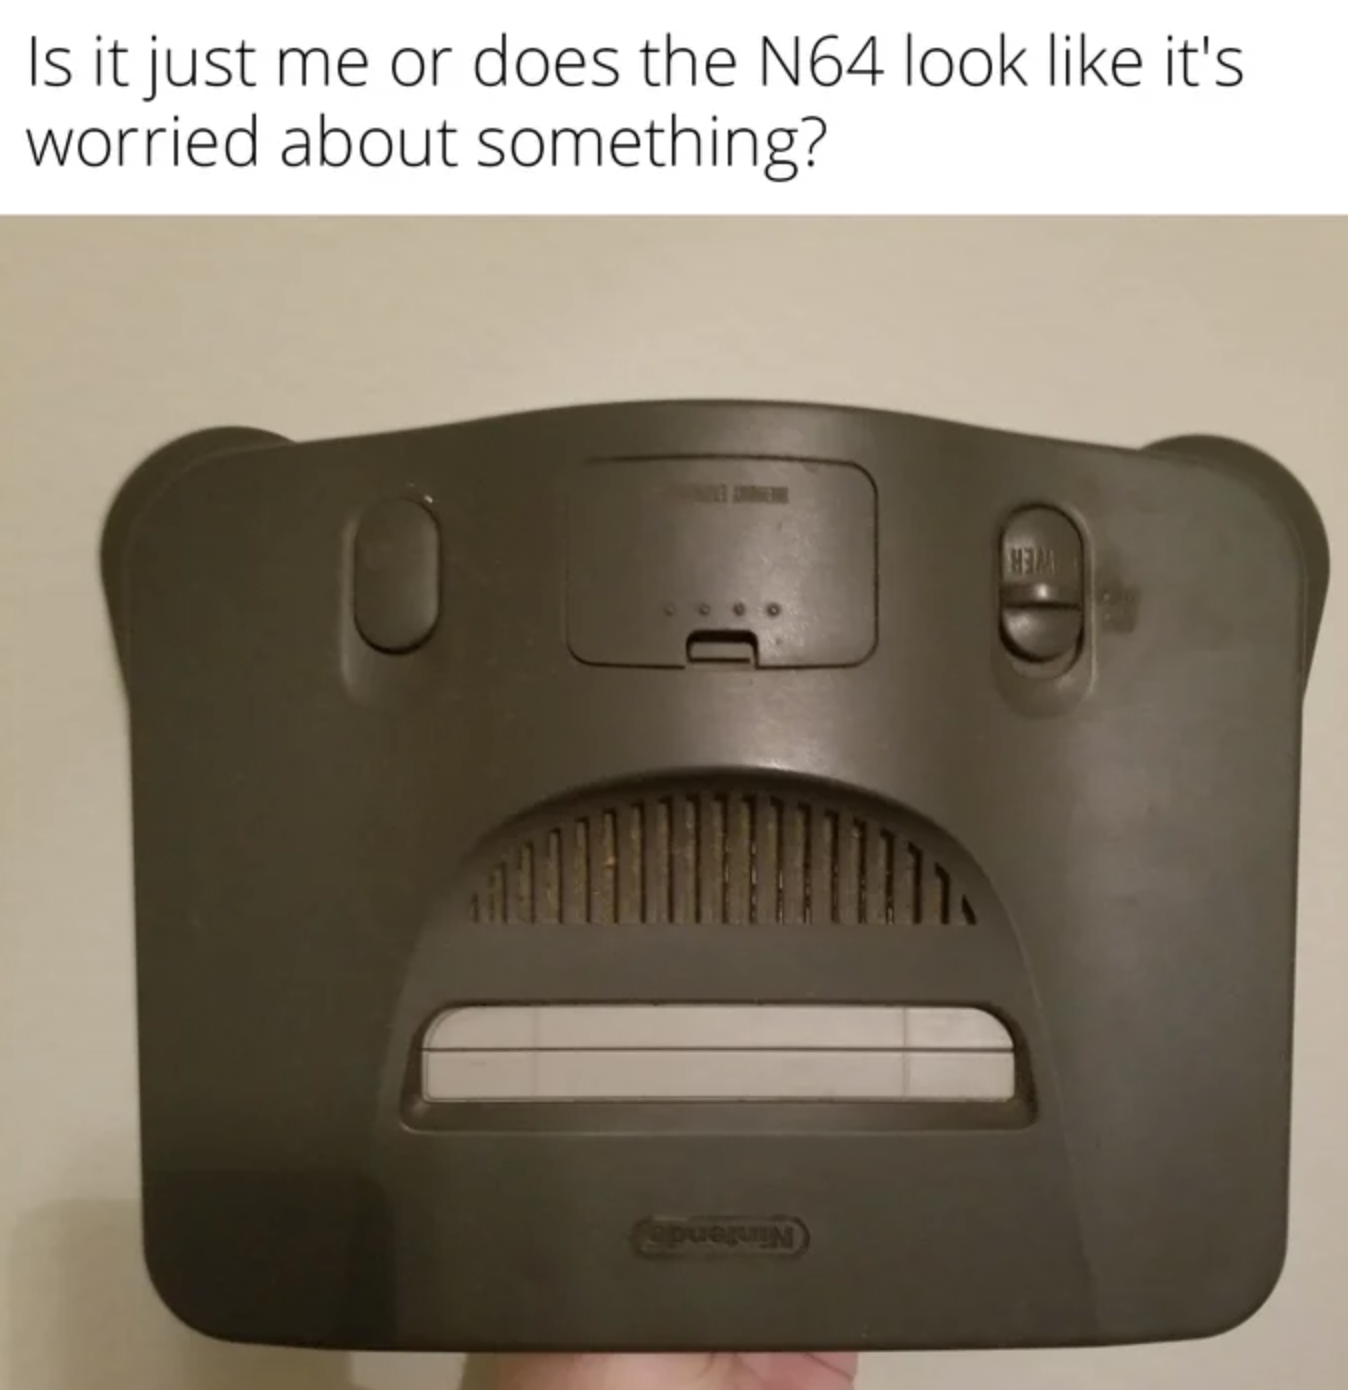 funny gaming memes - electronics - Is it just me or does the N64 look it's worried about something?